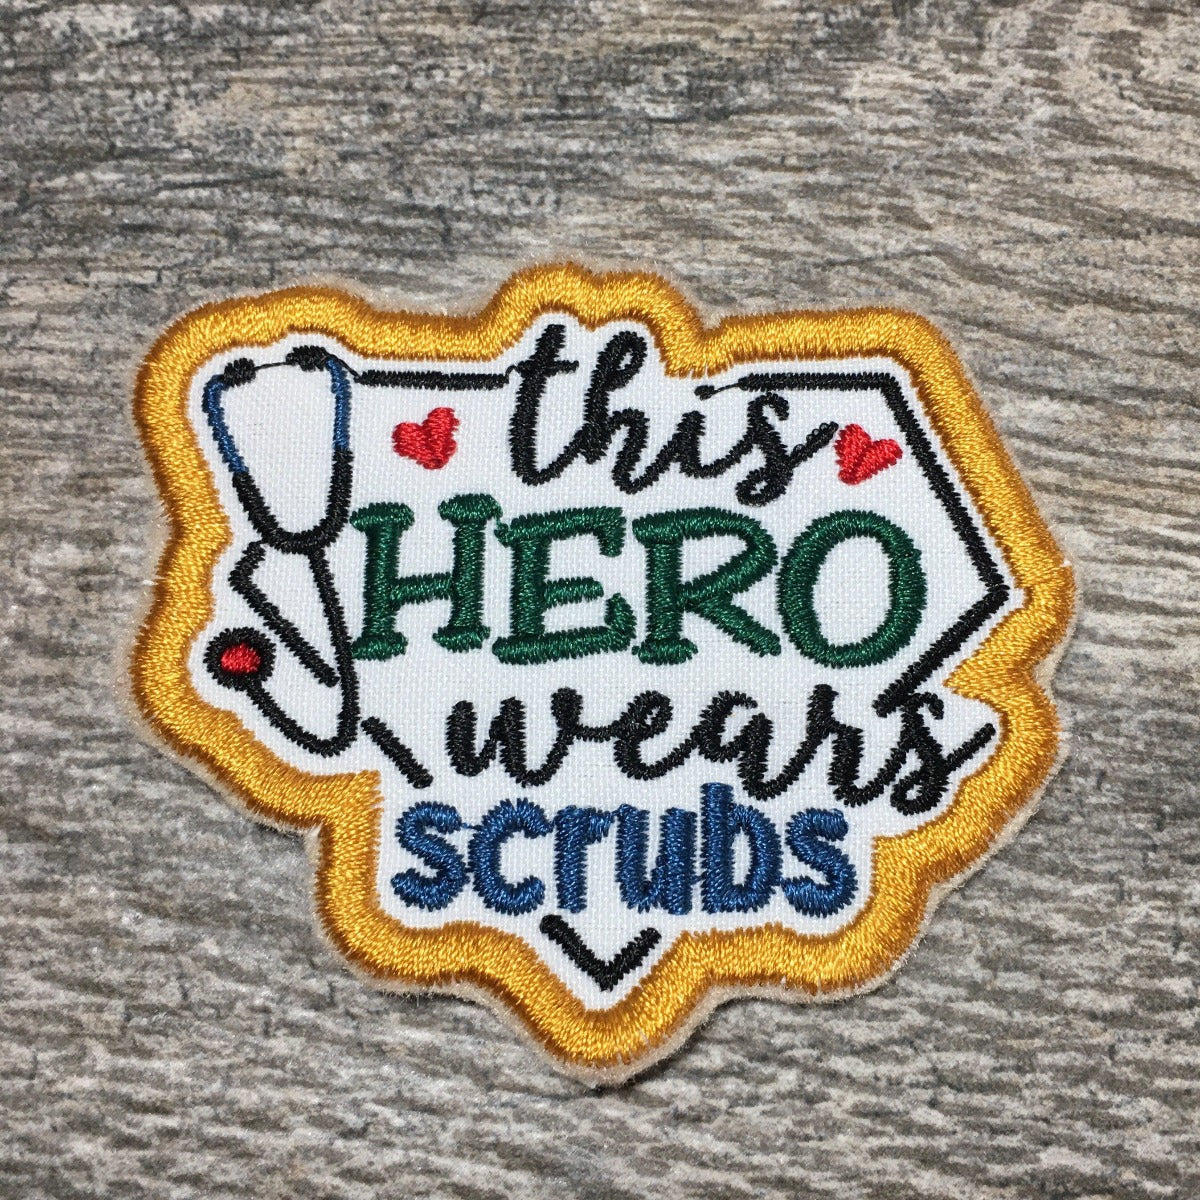 This hero wears scrubs patch